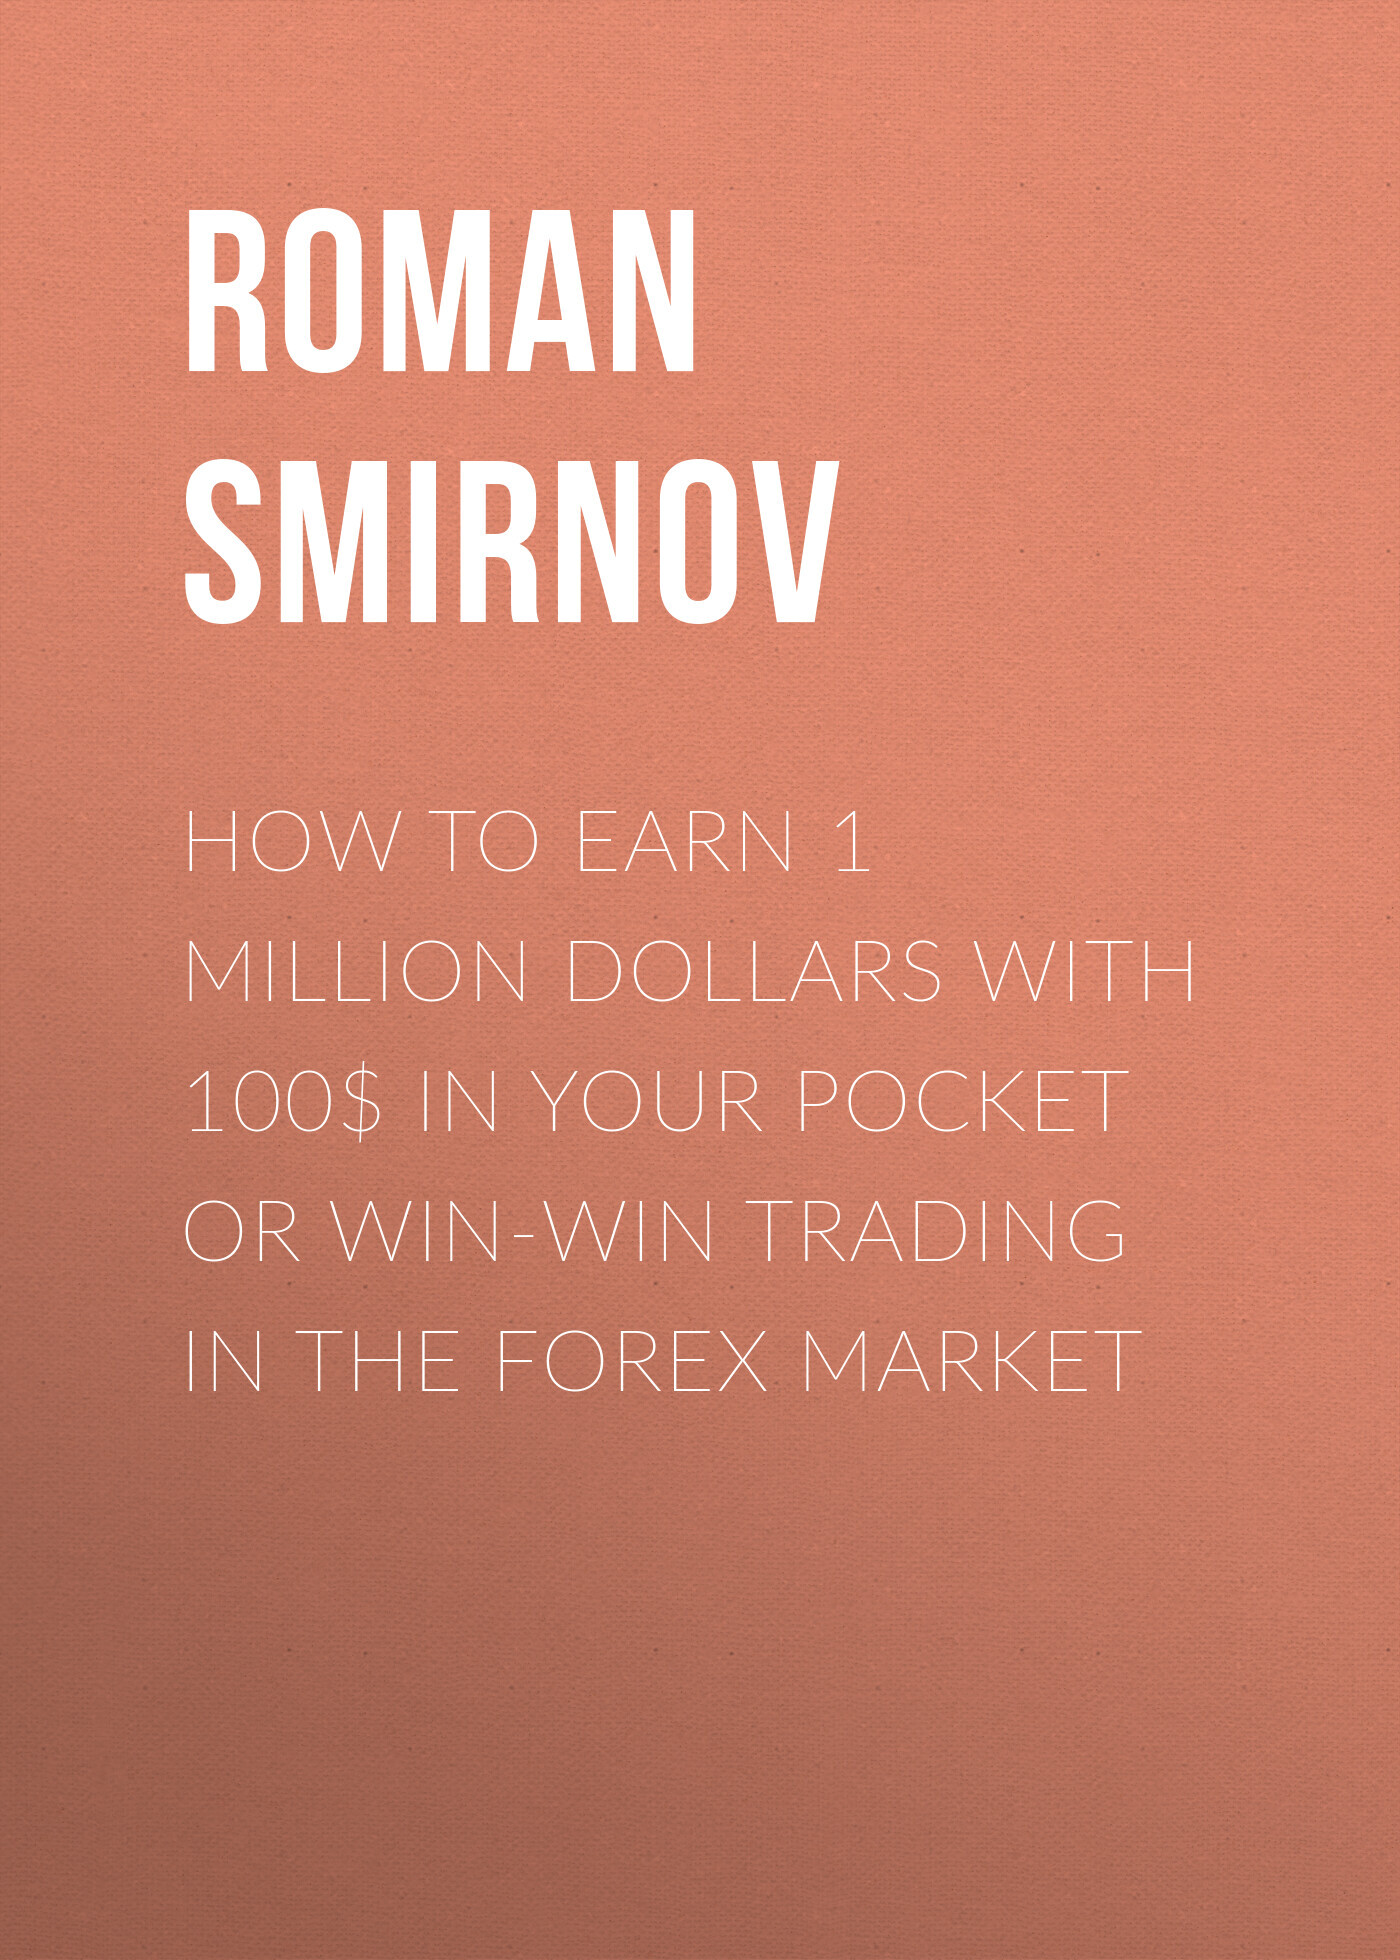 How to earn 1 million dollars with 100$ in your pocket or win-win trading in the Forex market - Roman Smirnov